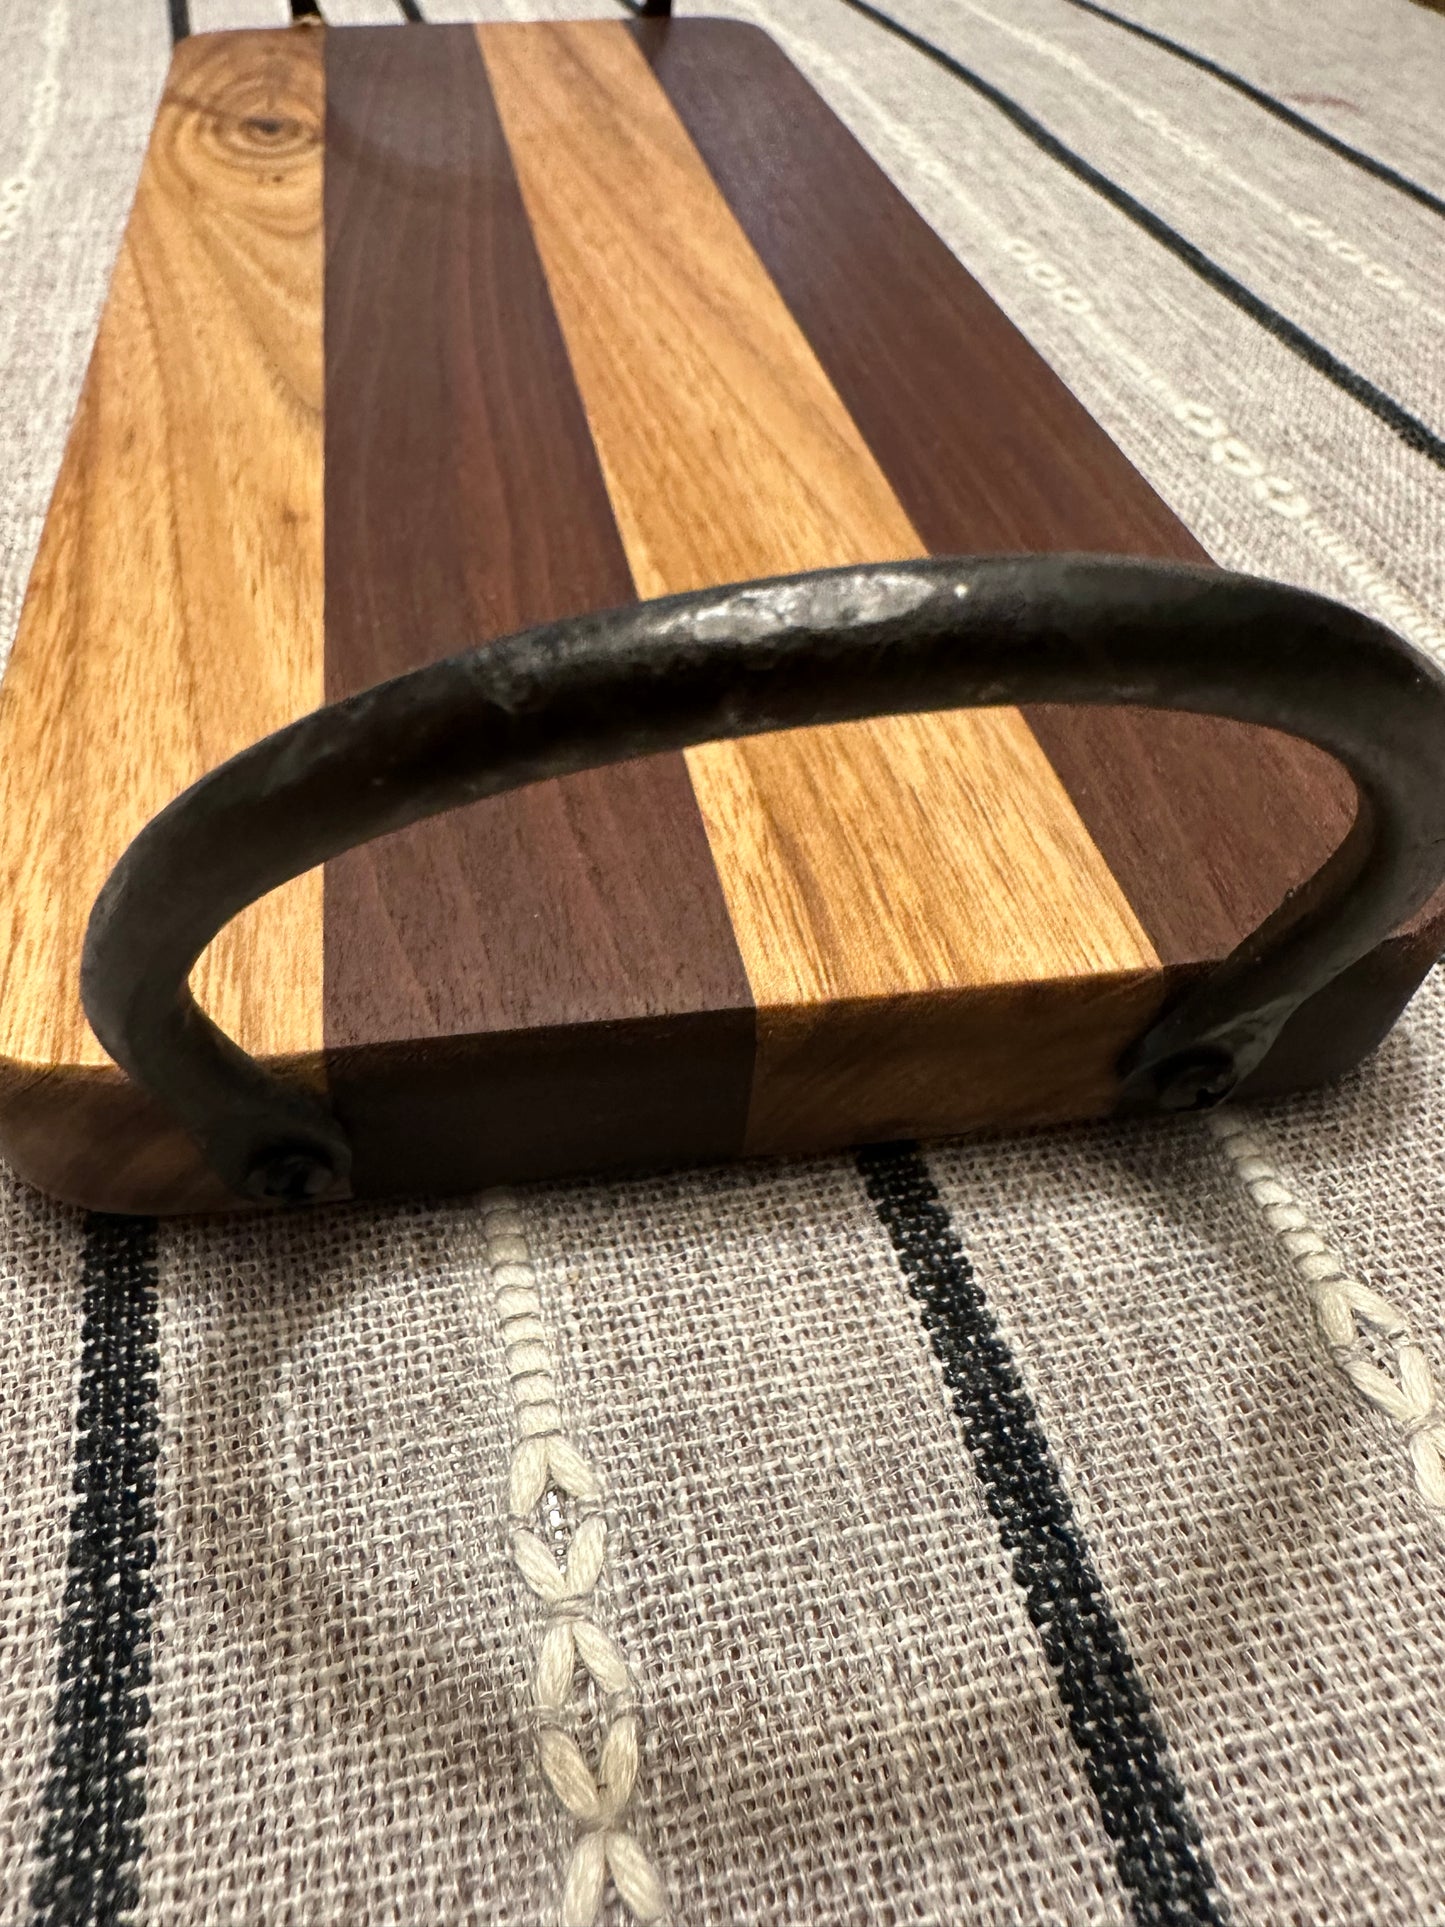 Walnut and butternut tray with handles